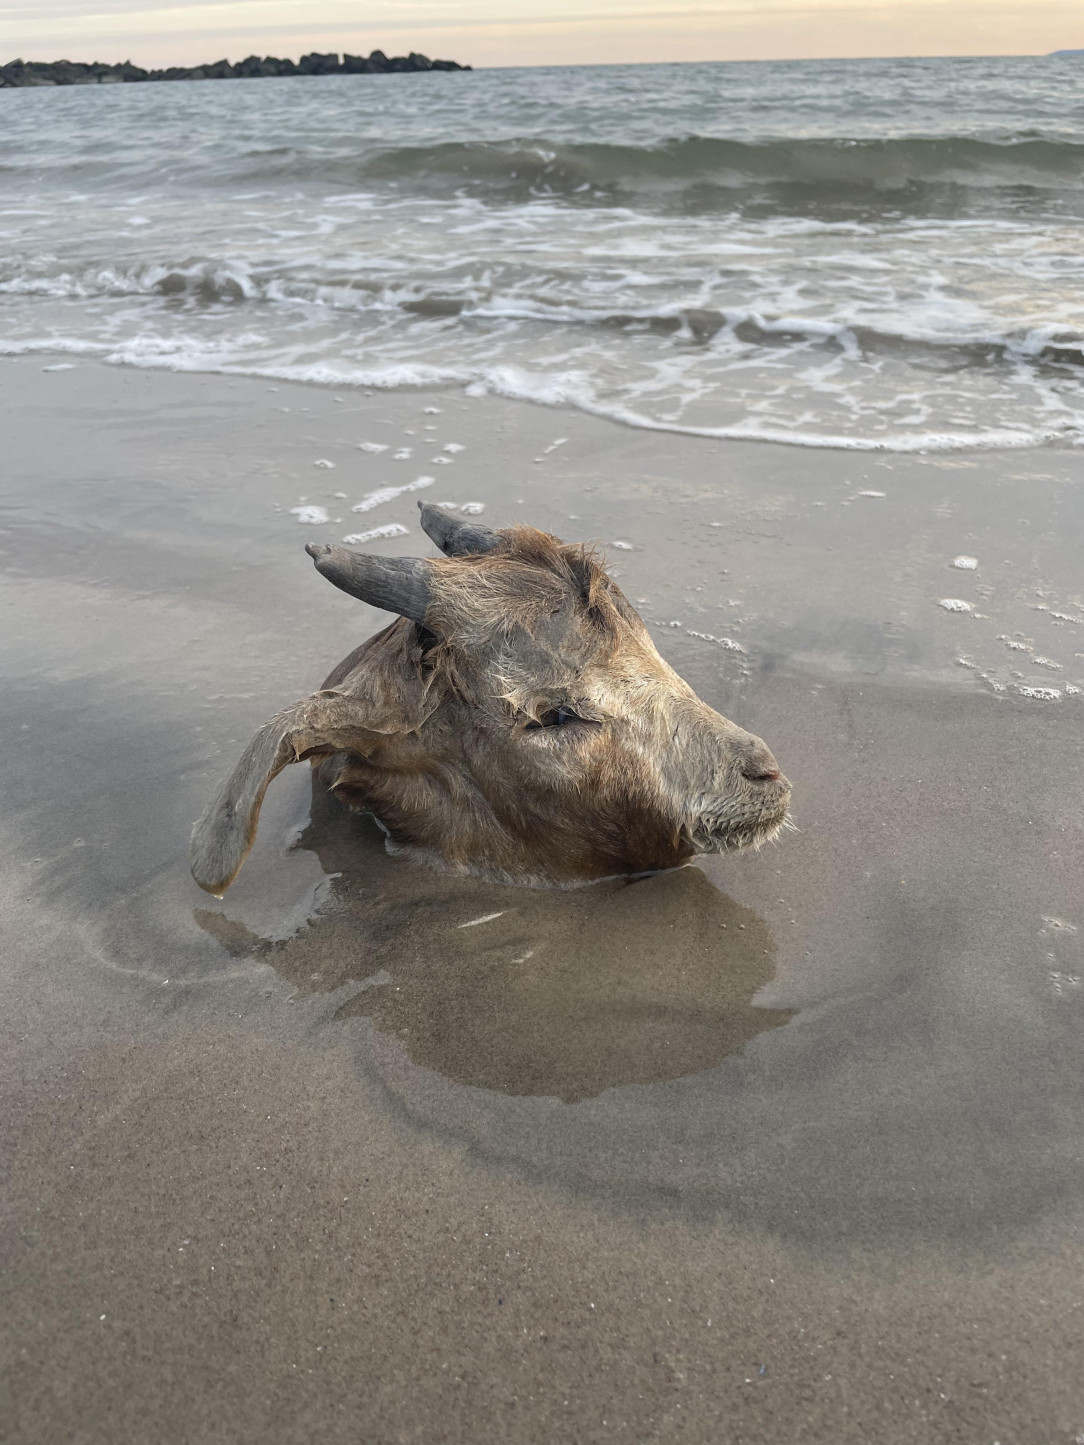 This washed ashore on Coney Island Beach today